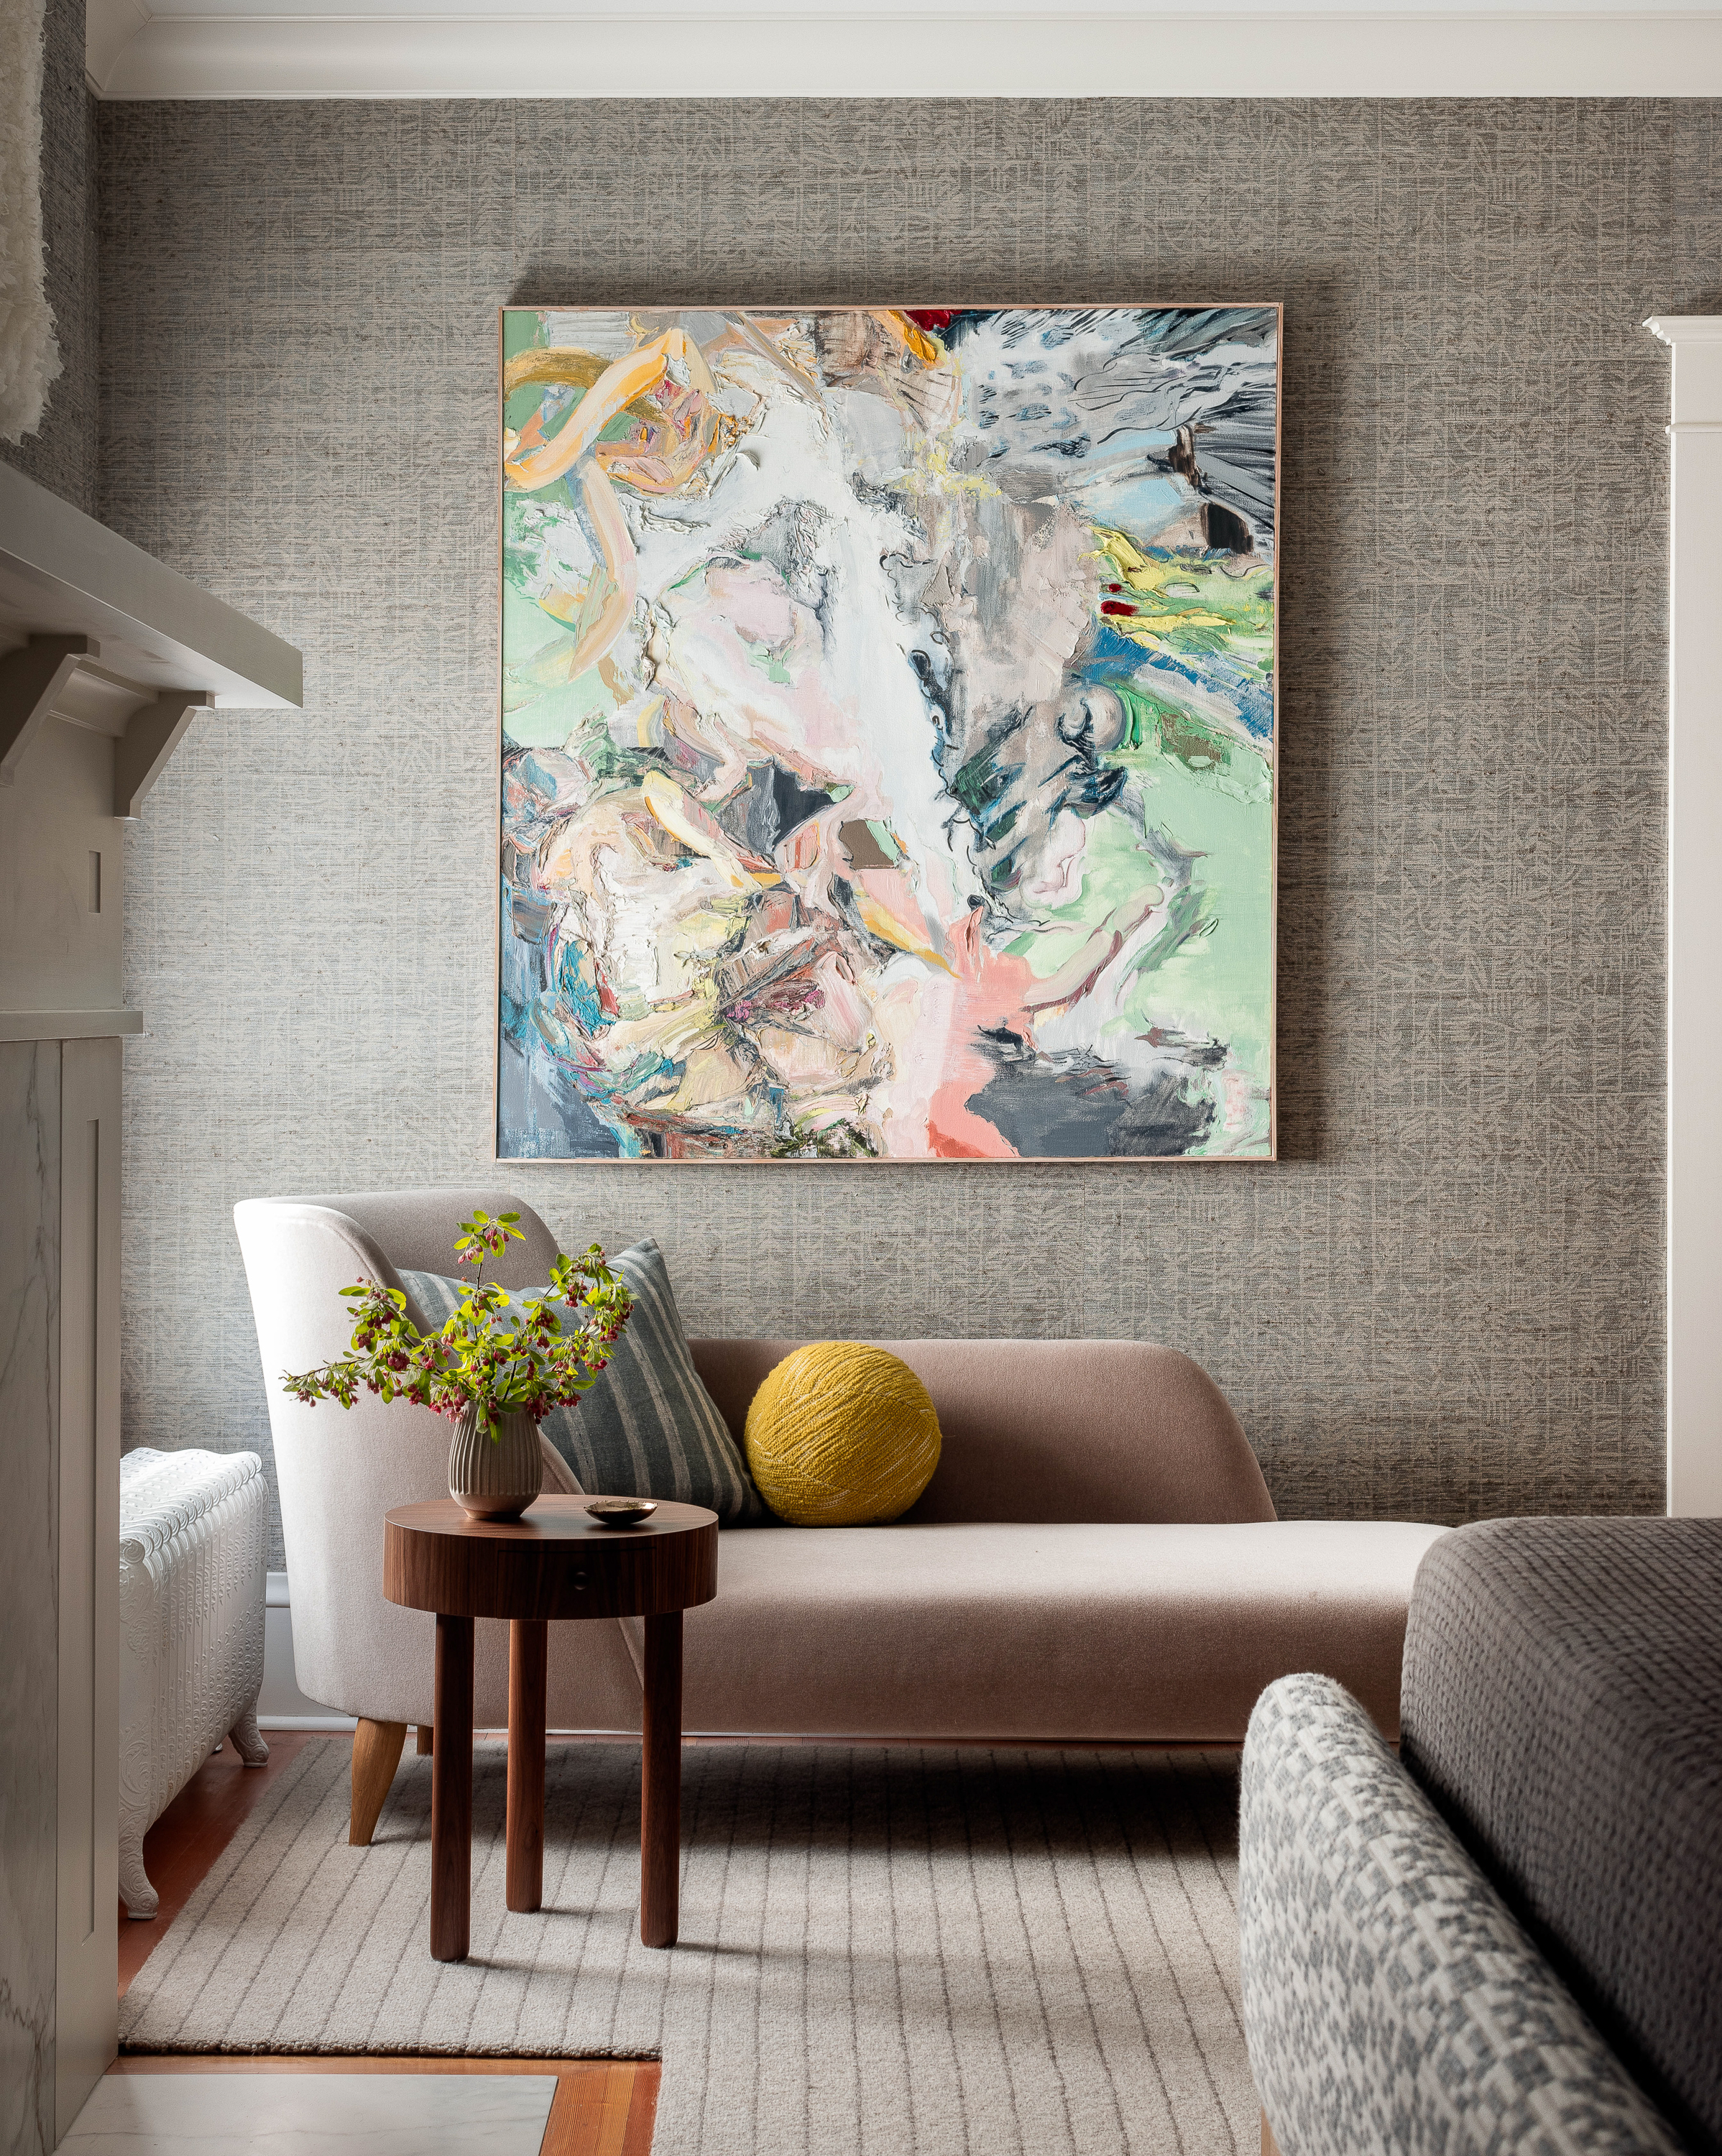 A light Pink upholstered chaise sits beneath a colorful oil painting by Drie Chapek.